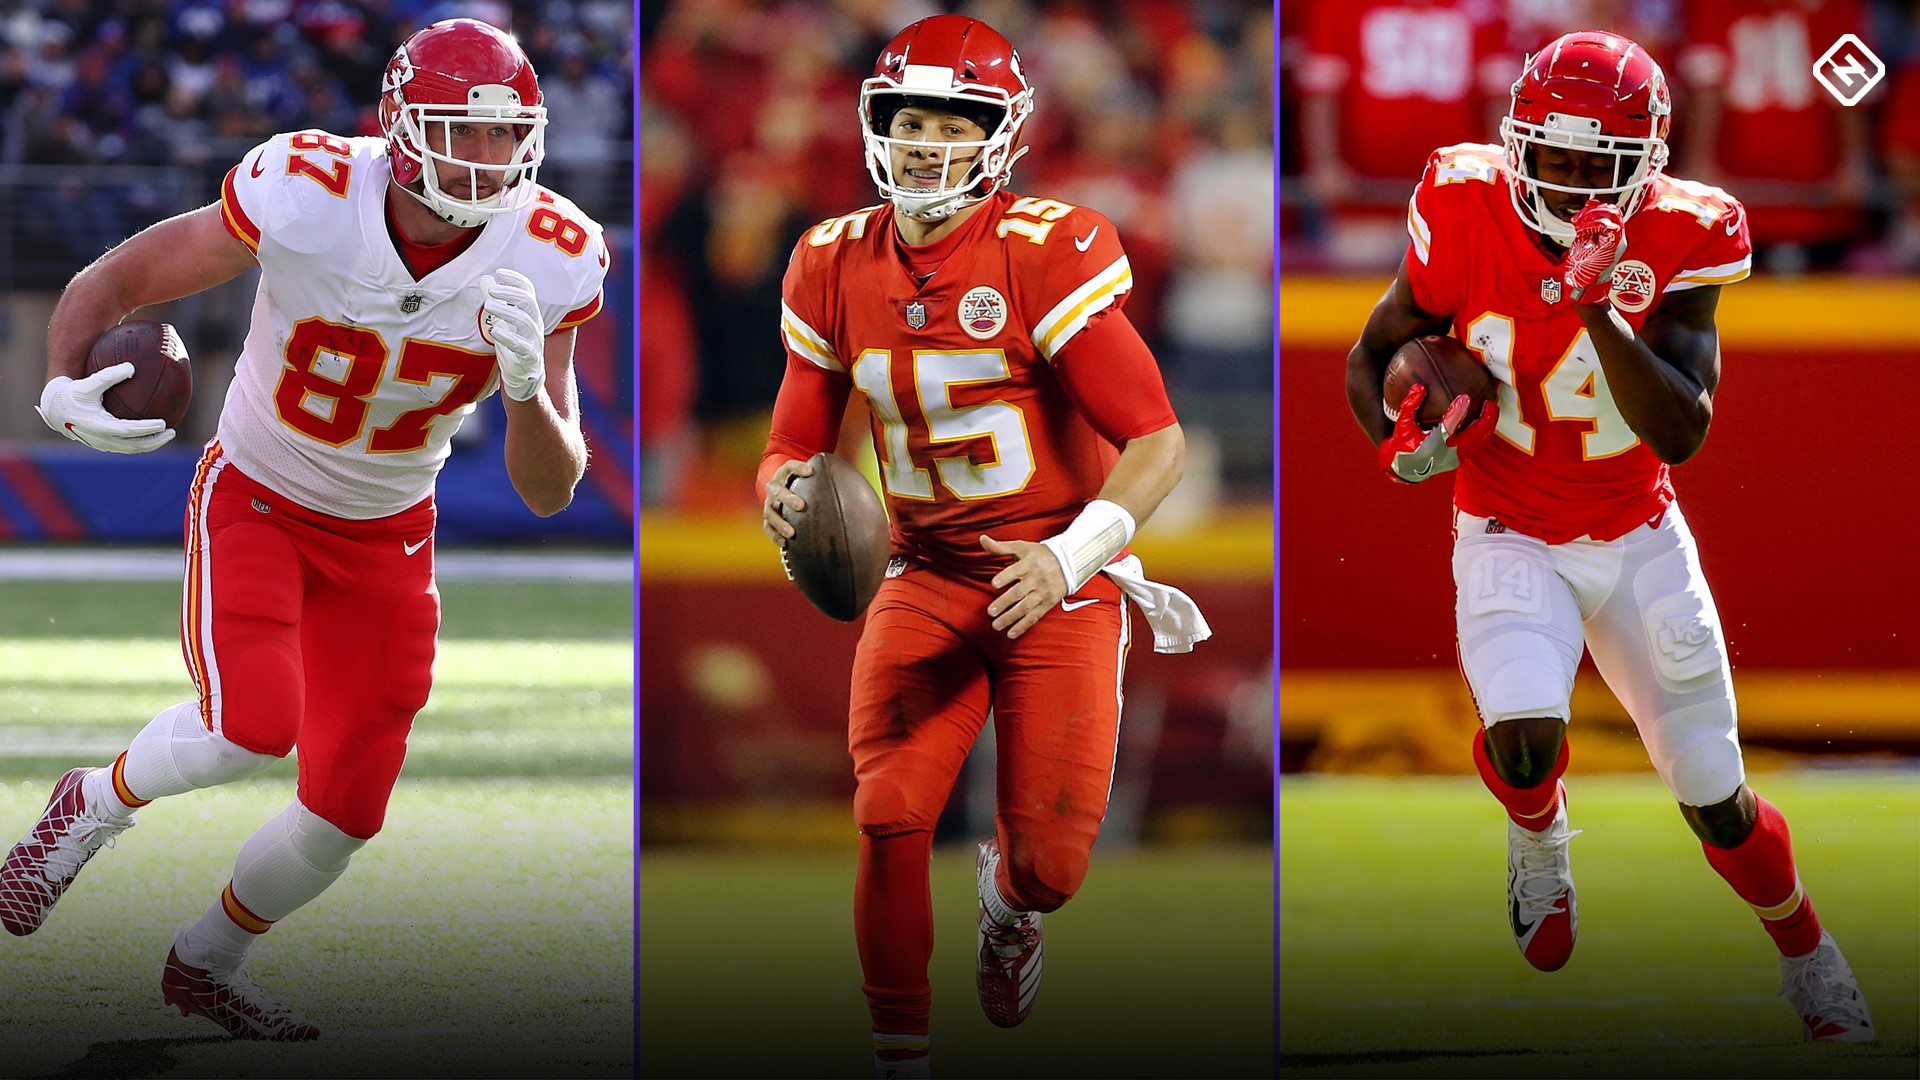 Chiefs Uniforms / Kansas City Chiefs - Home Stadiums | Heritage Uniforms and / The best